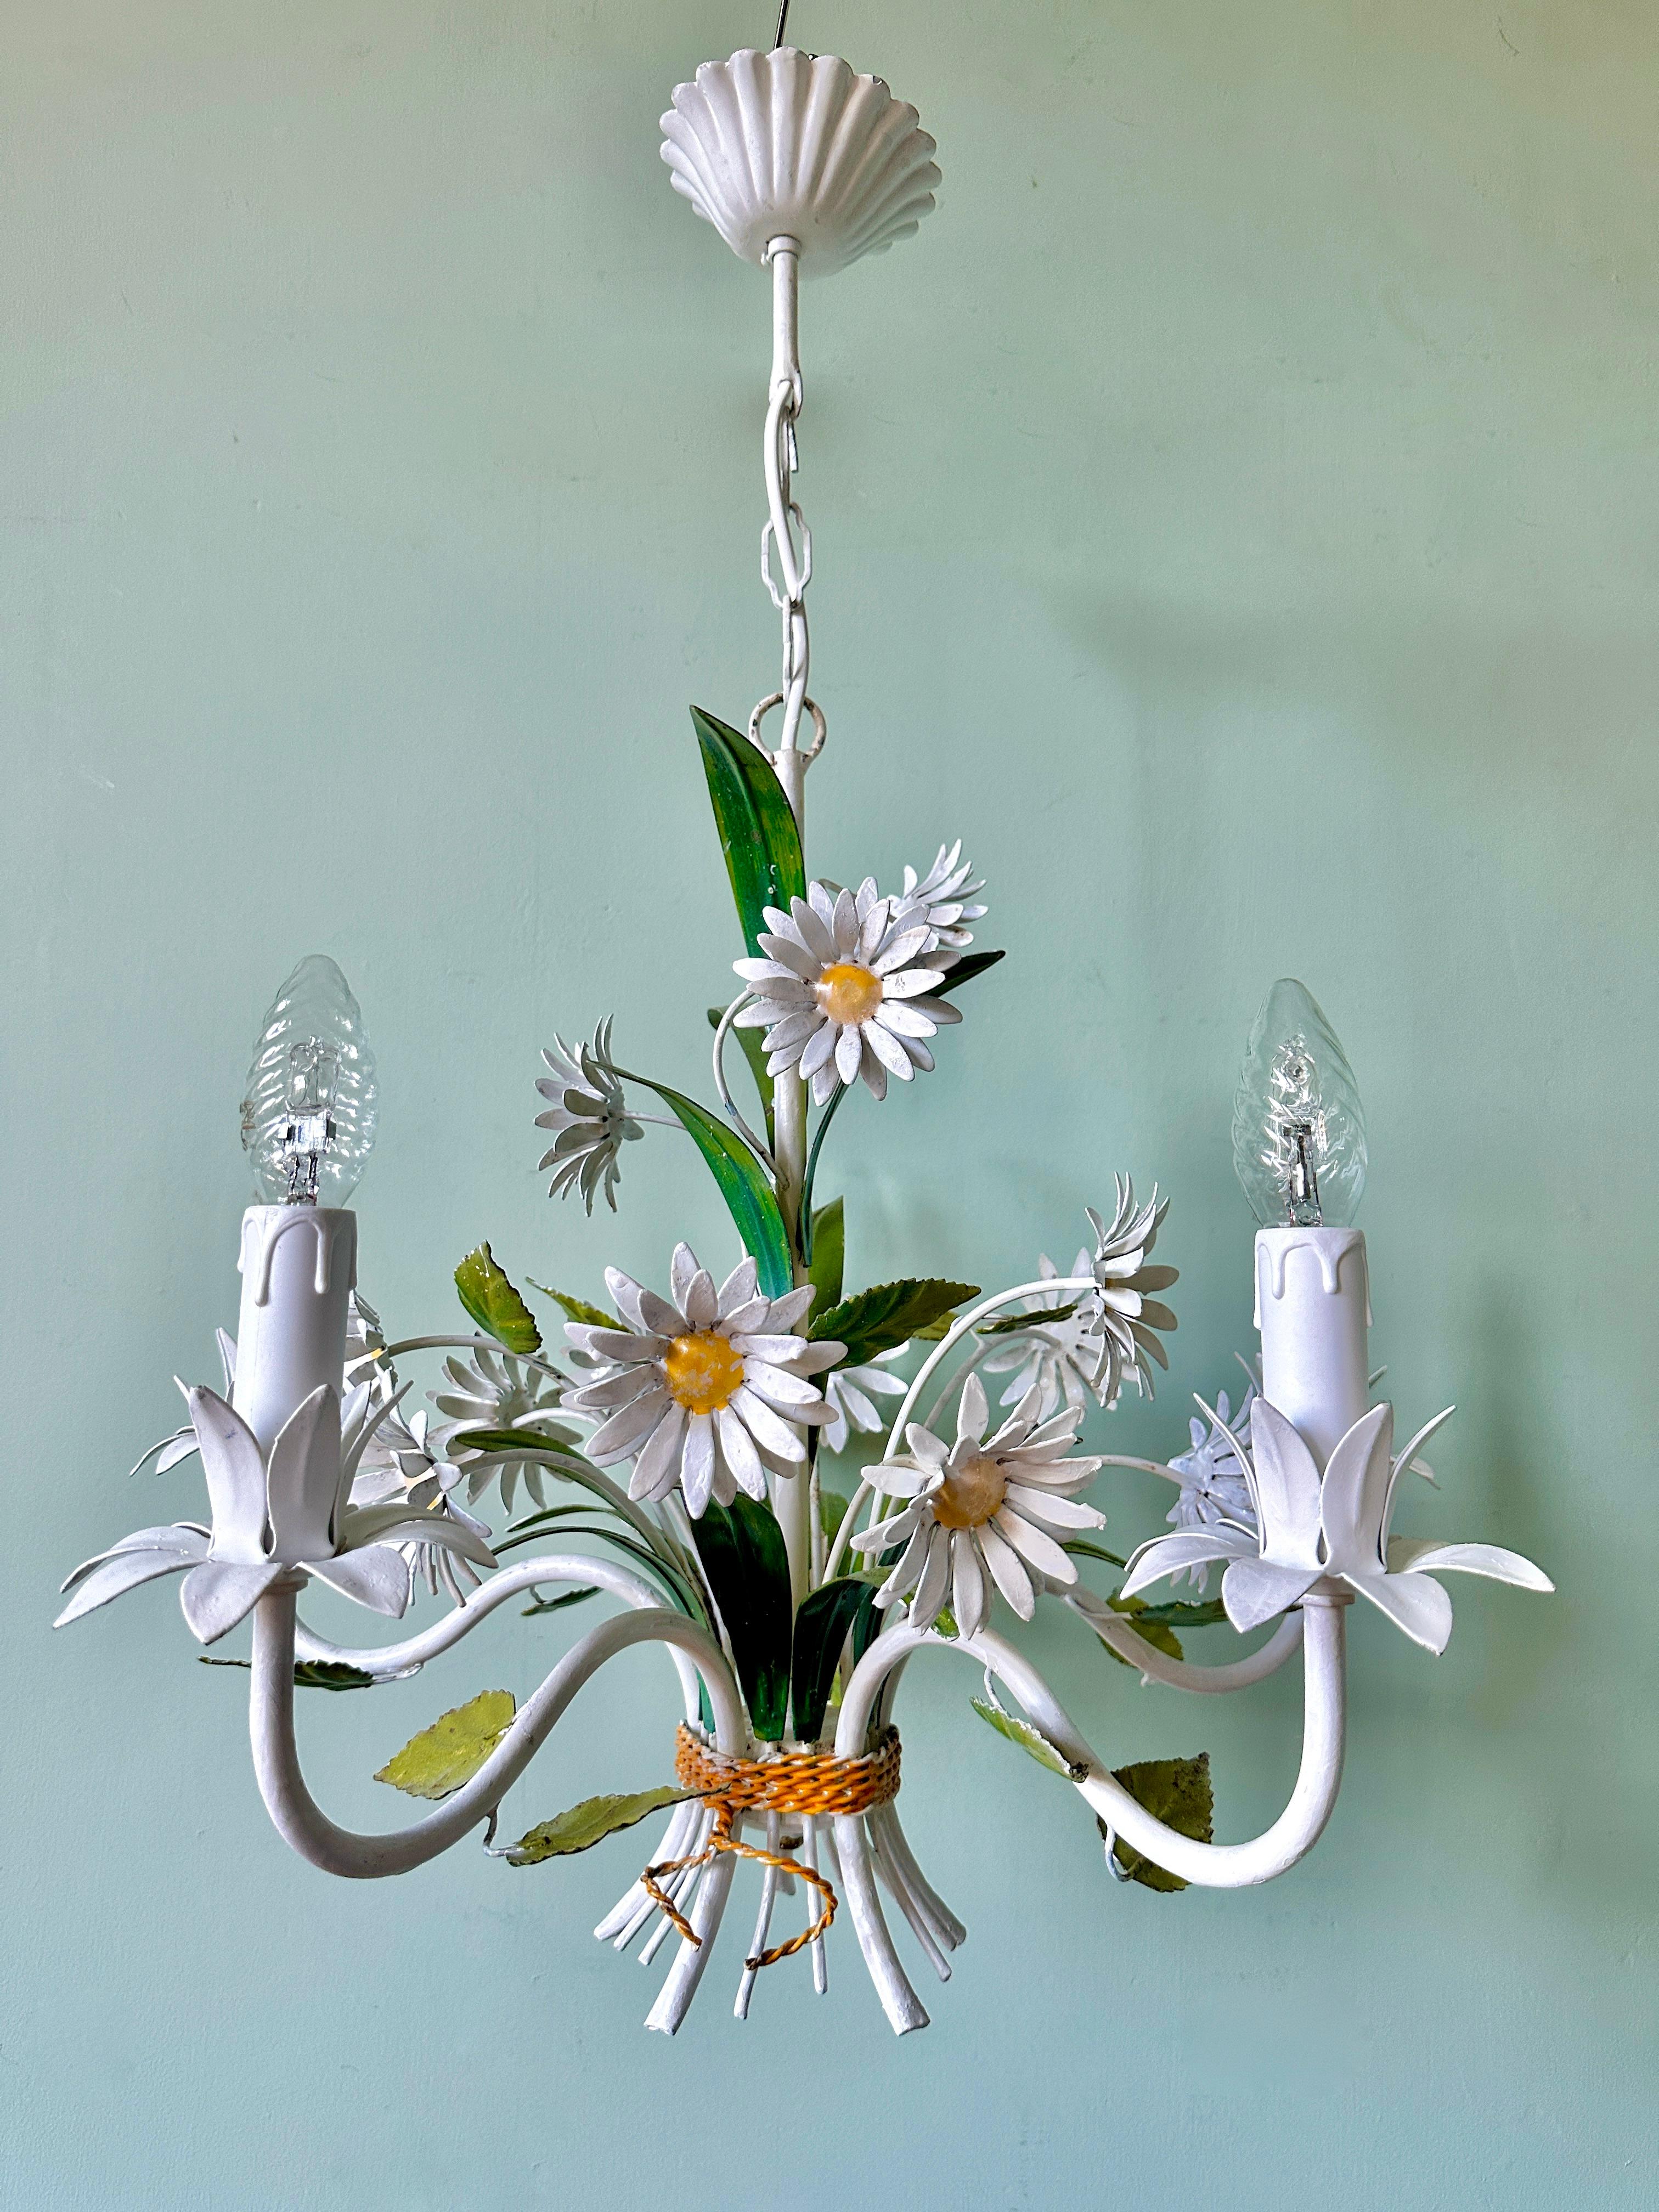 1960s French tole daisy chandelier.

A very lovely, hand-painted, five-arm ceiling light with scalloped ceiling rose. In very good condition with light and attractive wear. The chandelier has been rewired, fitted with new bulb holders & sleeves and